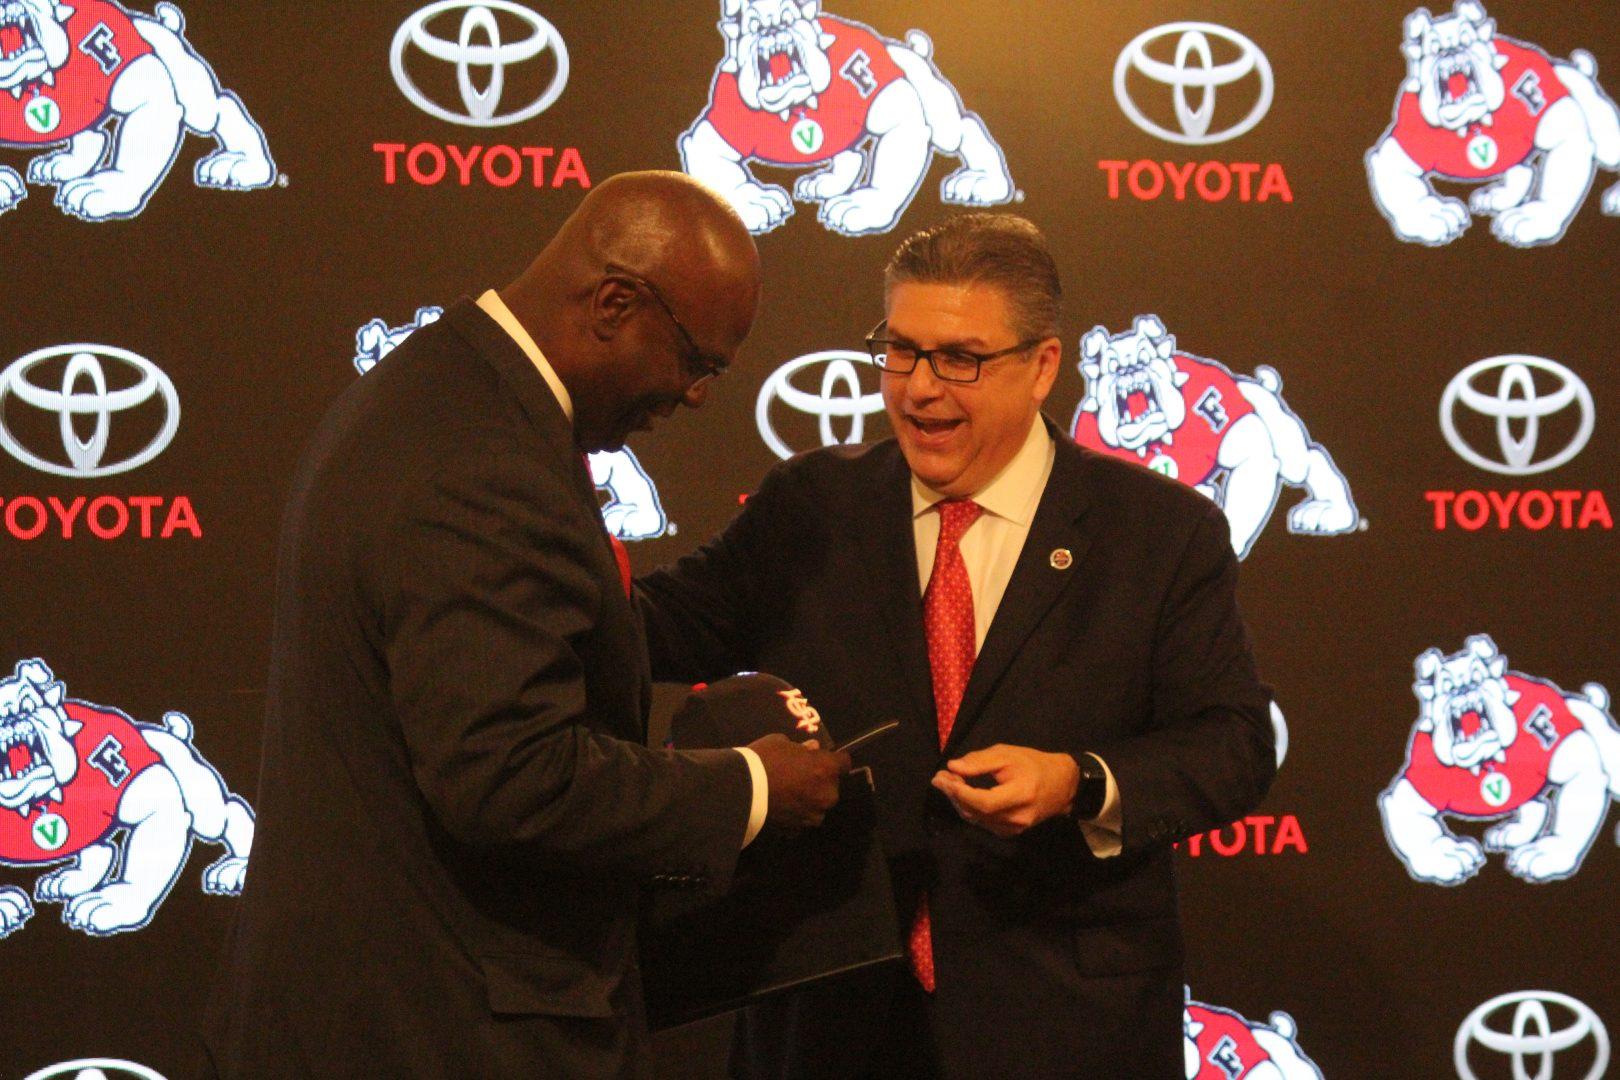 Fresno State Athletic Director Terry Tumey (left) accepts a Fresno State cap from university President Dr. Joseph I. Castro, right, on June 25, 2018. (Dan Waterhouse/The Collegian)